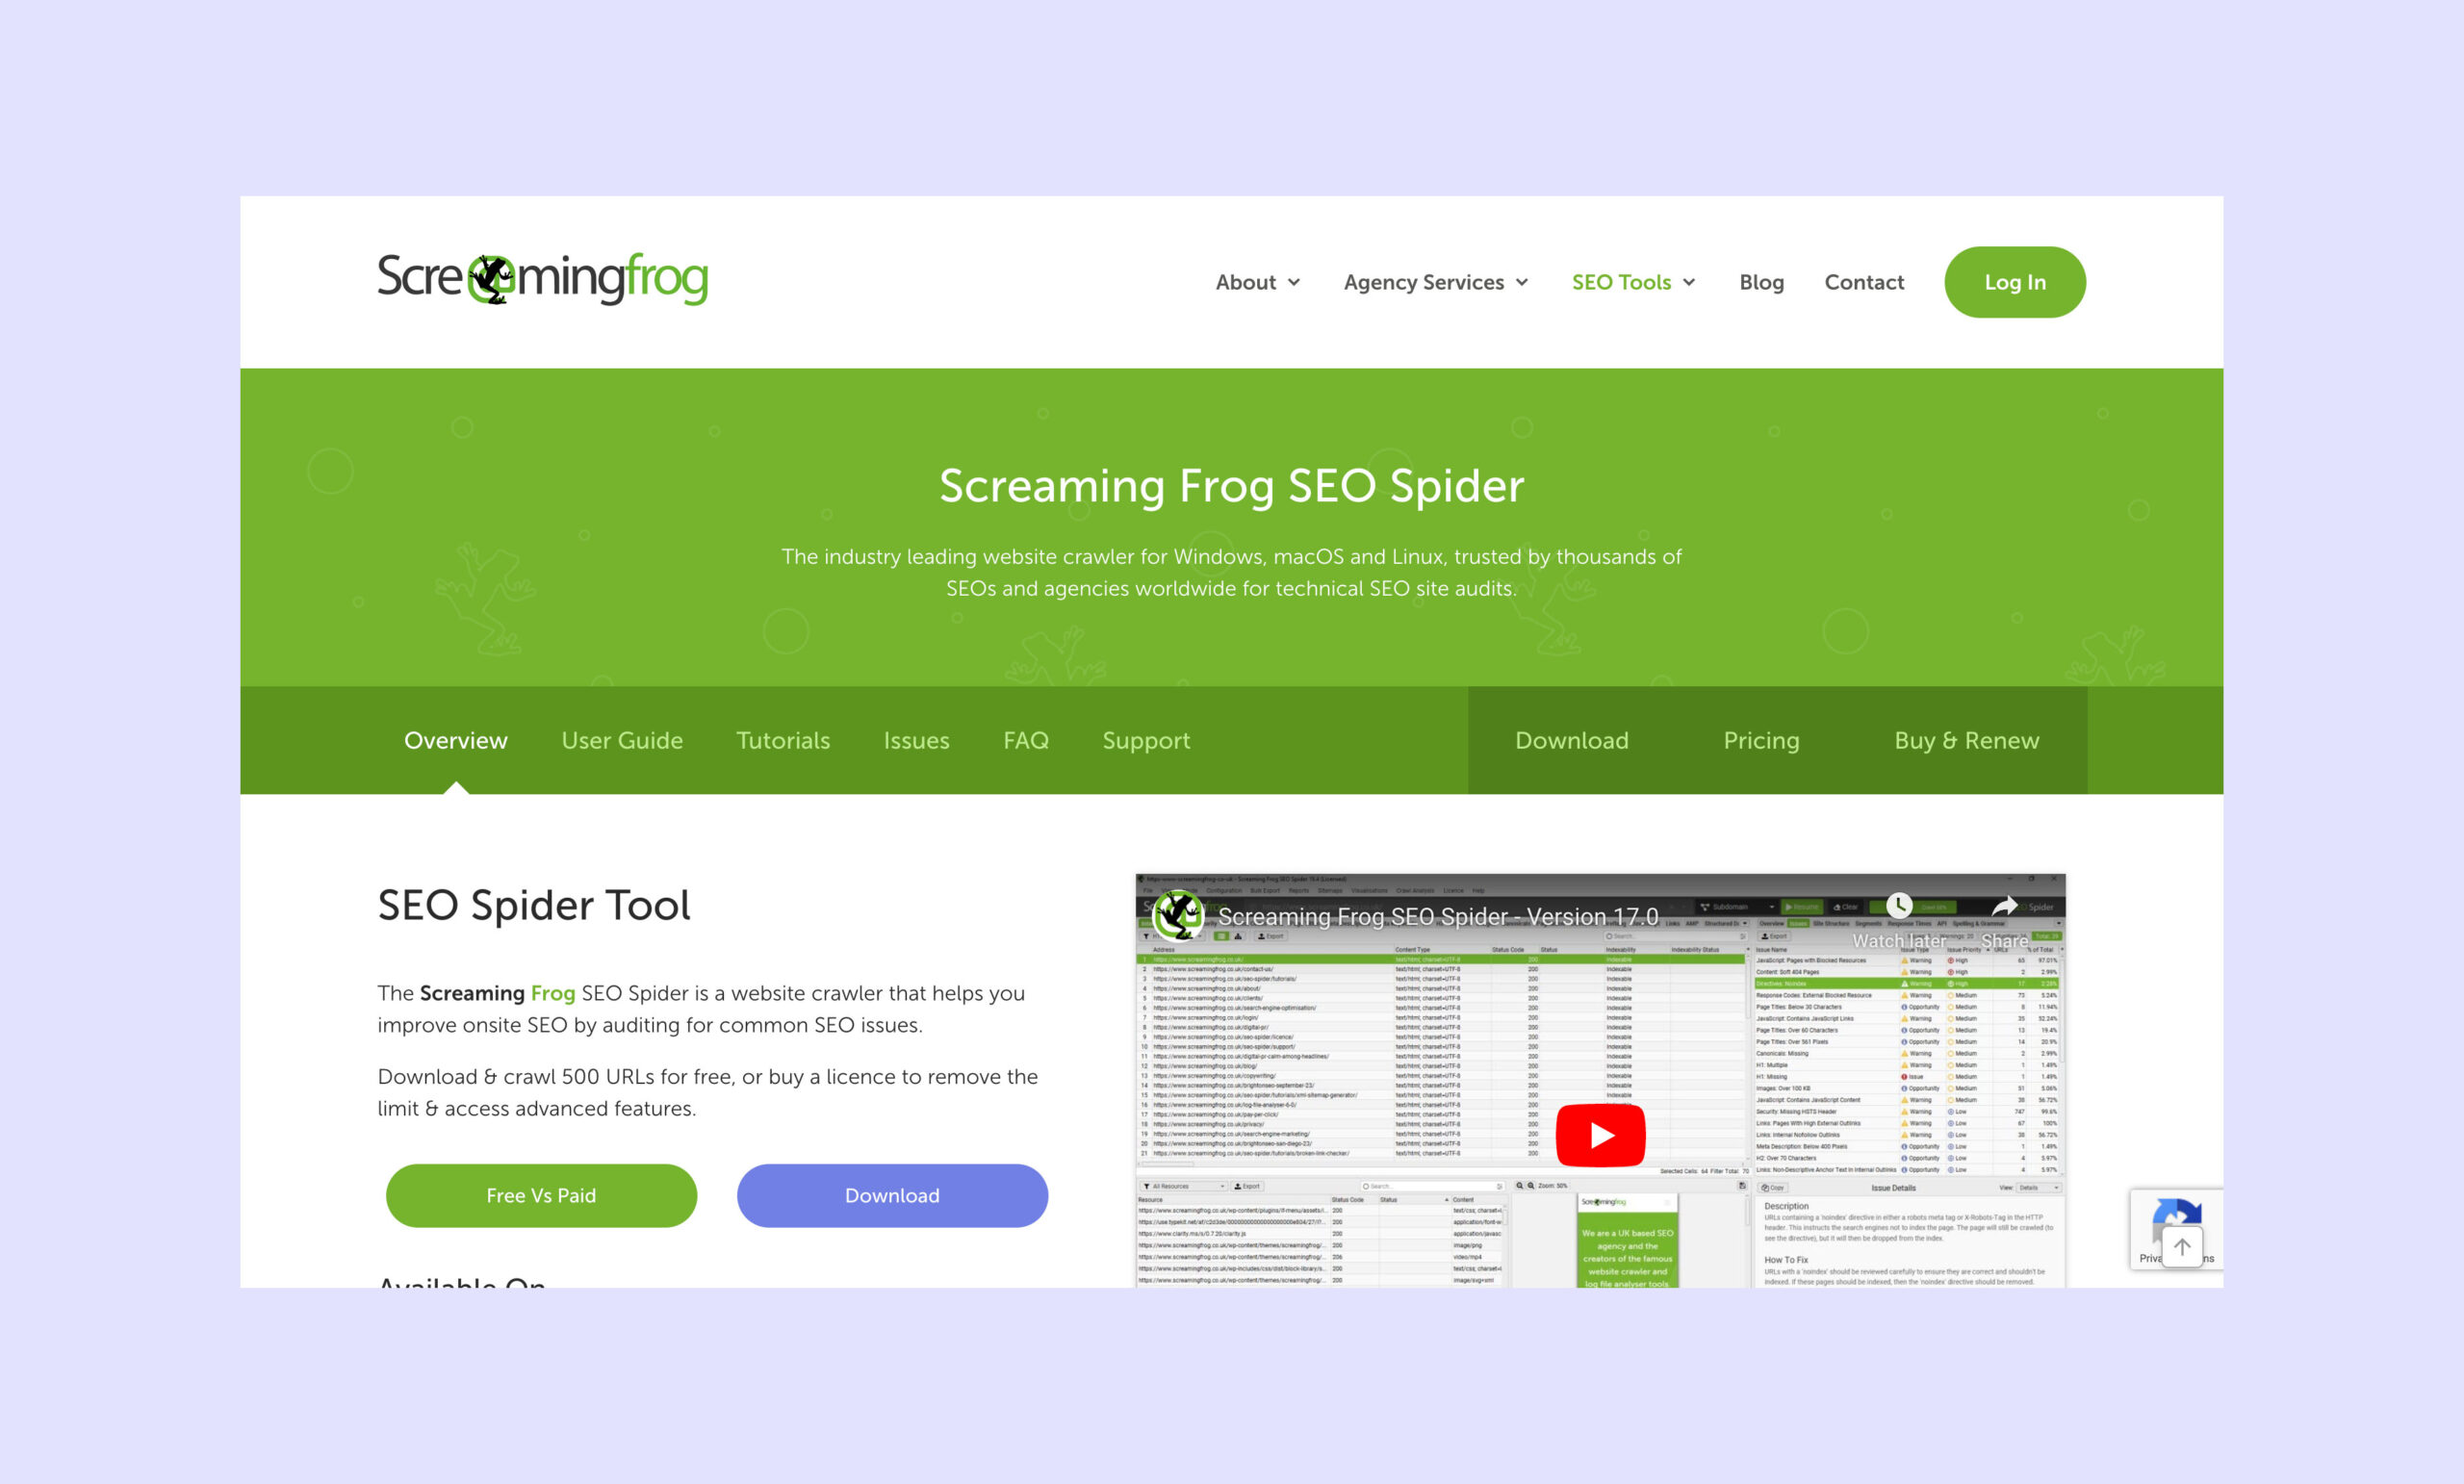 A screenshot showing the homepage of the SEO Spider Tool from Screaming Frog.